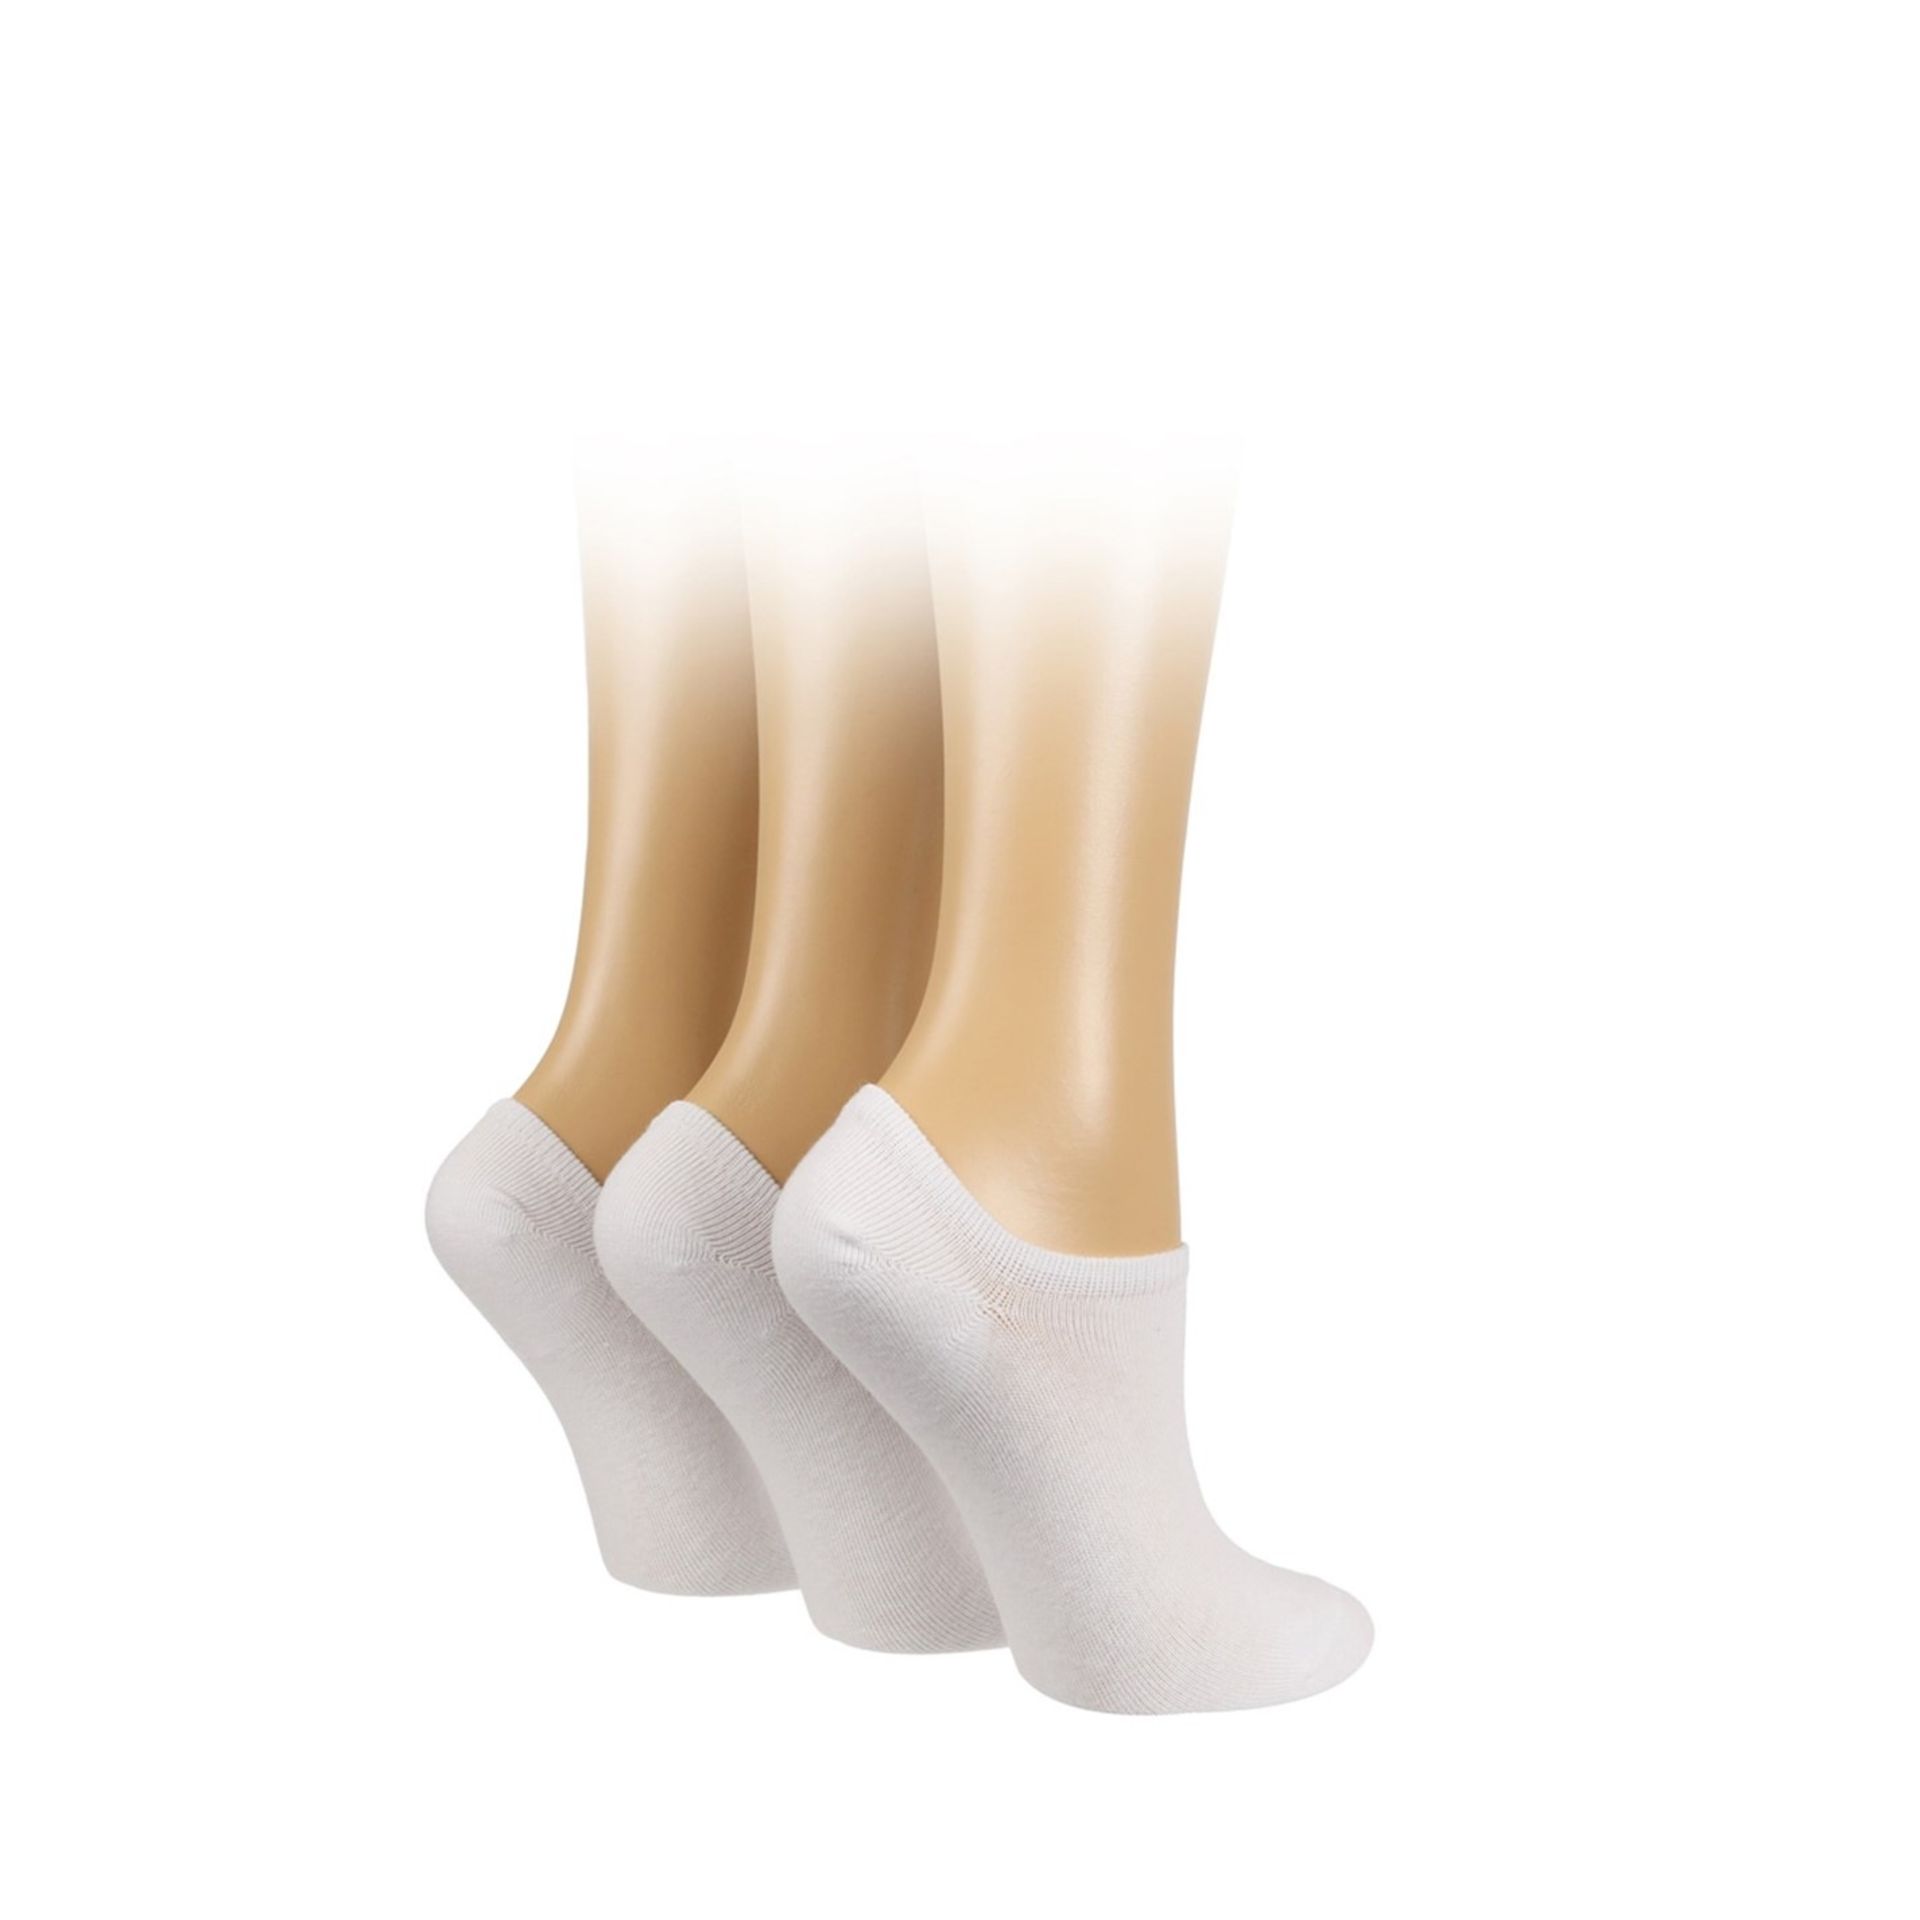 Ladies Pringle Trainer Socks 3 Pack Size 4-8 (Delivery Band A)